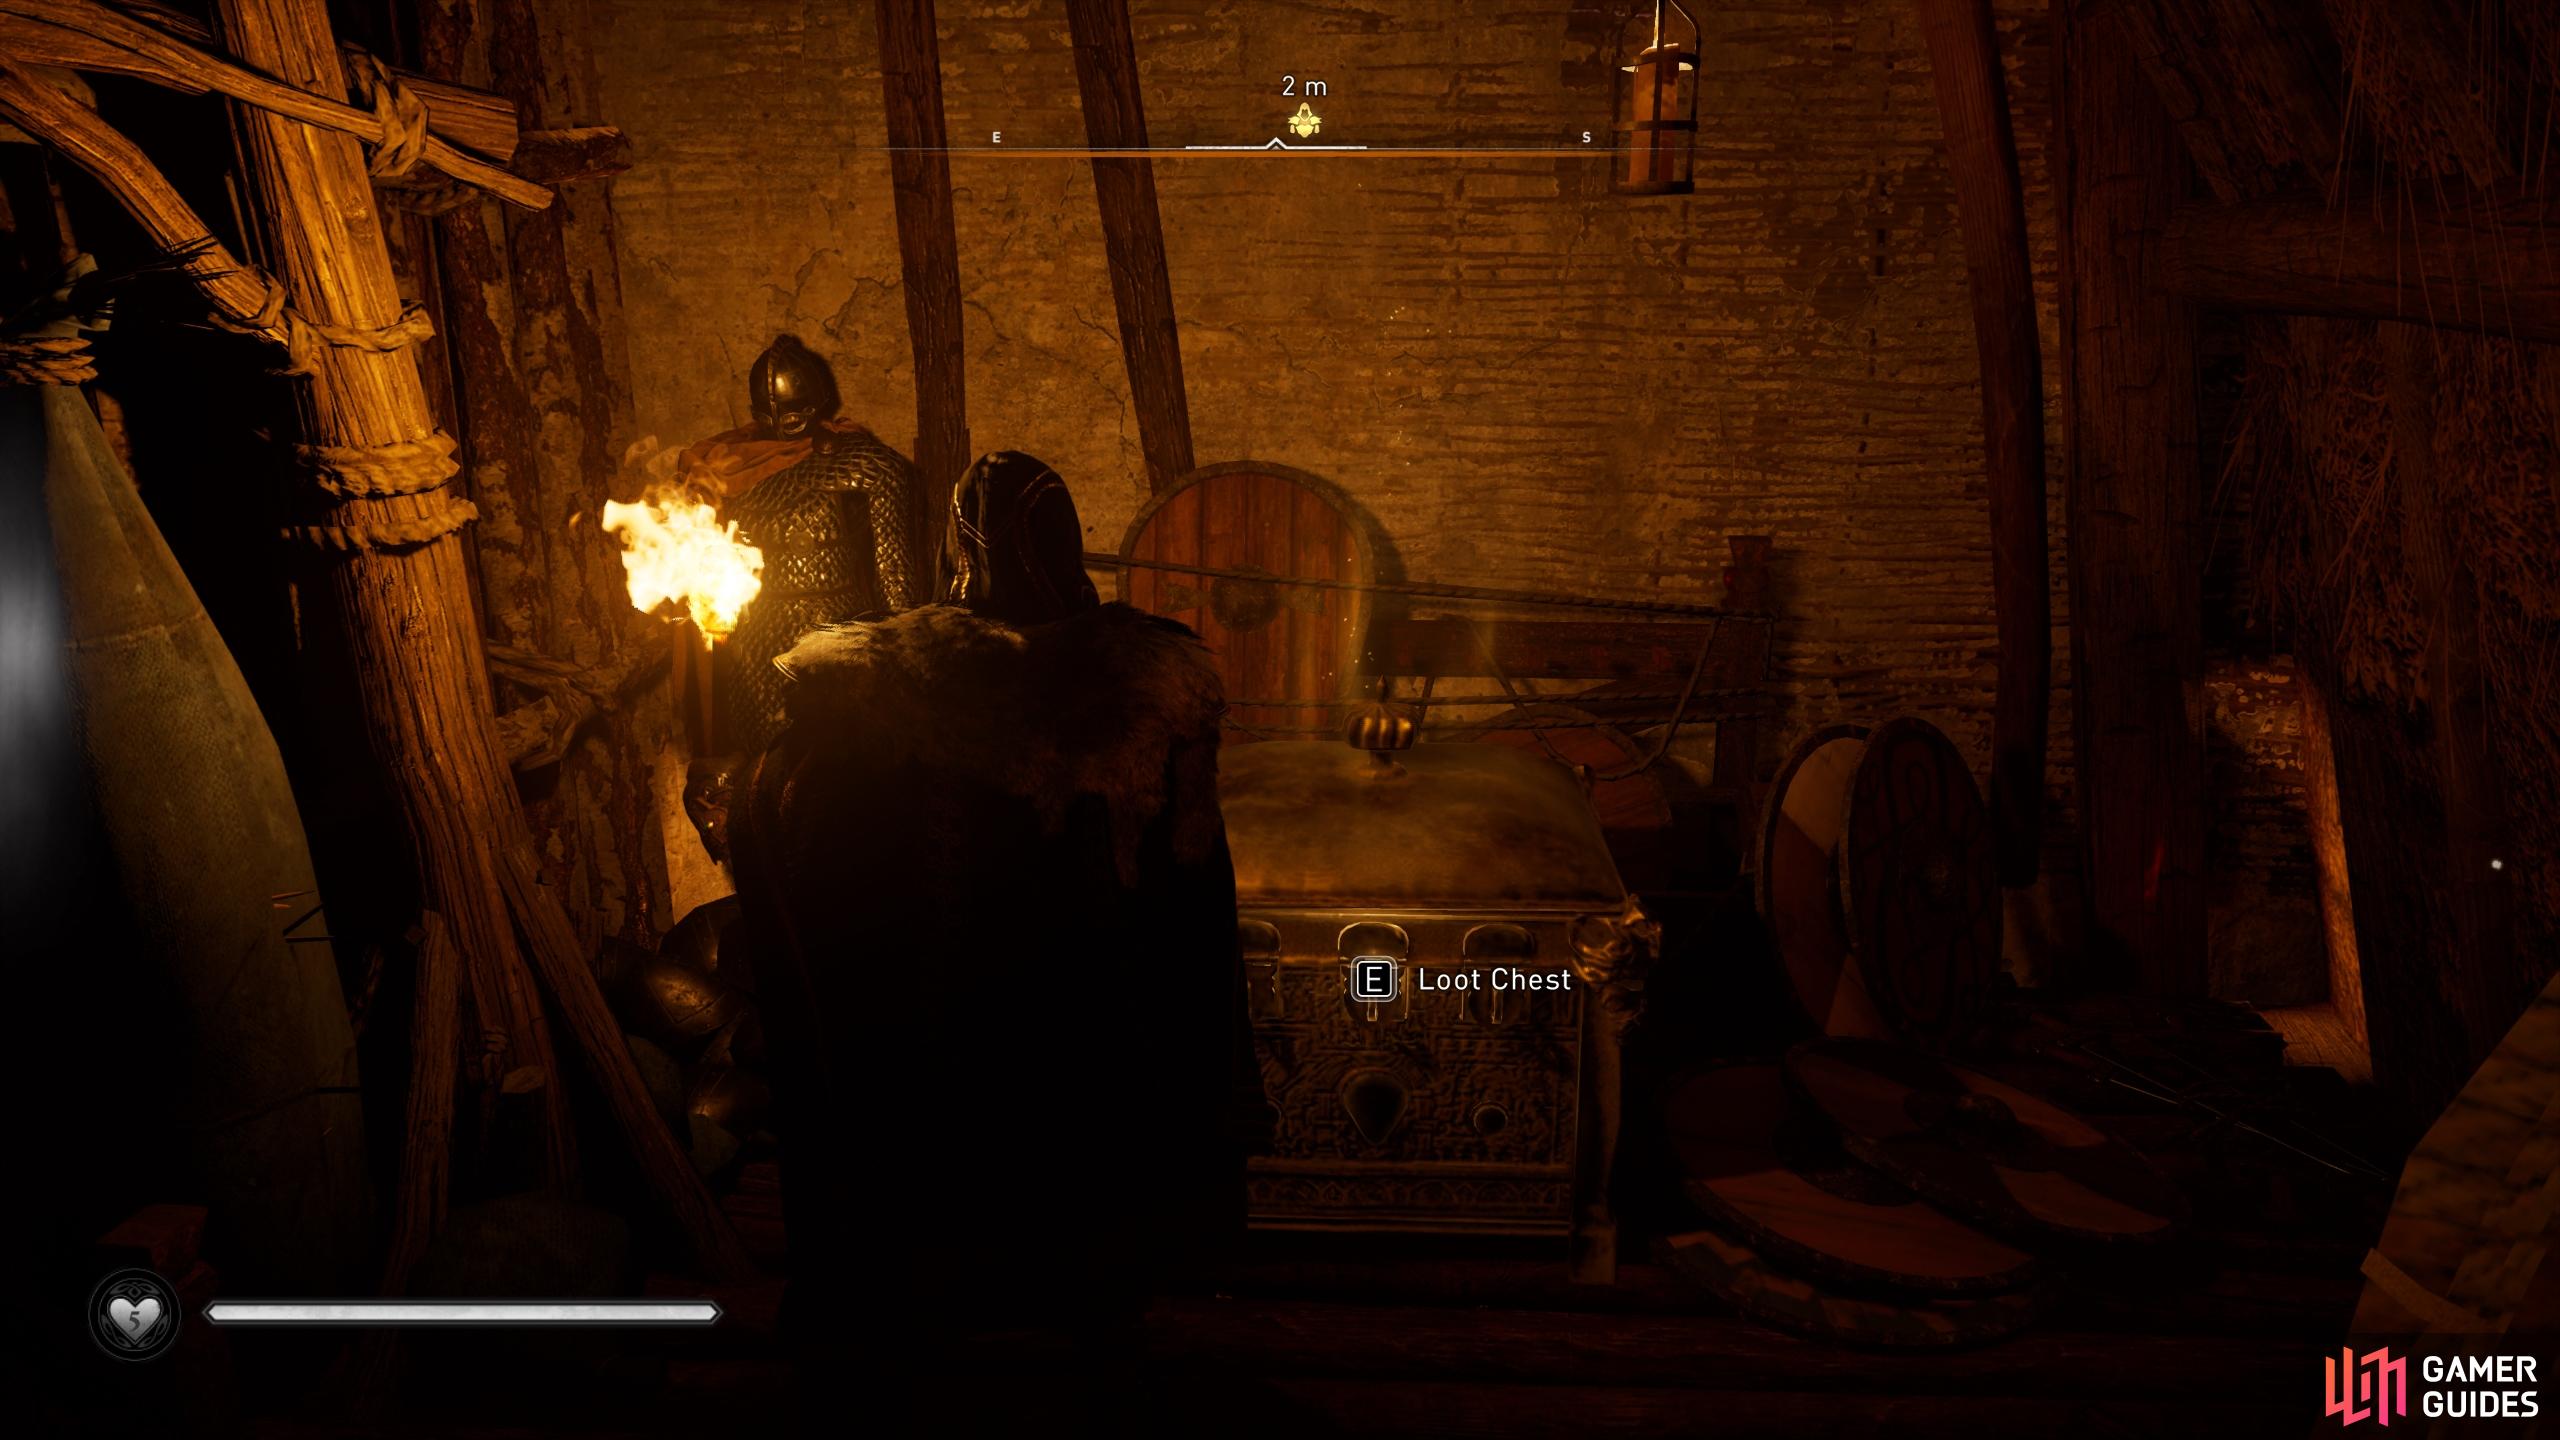 The chest is located in a small hidden armory room behind the throne.